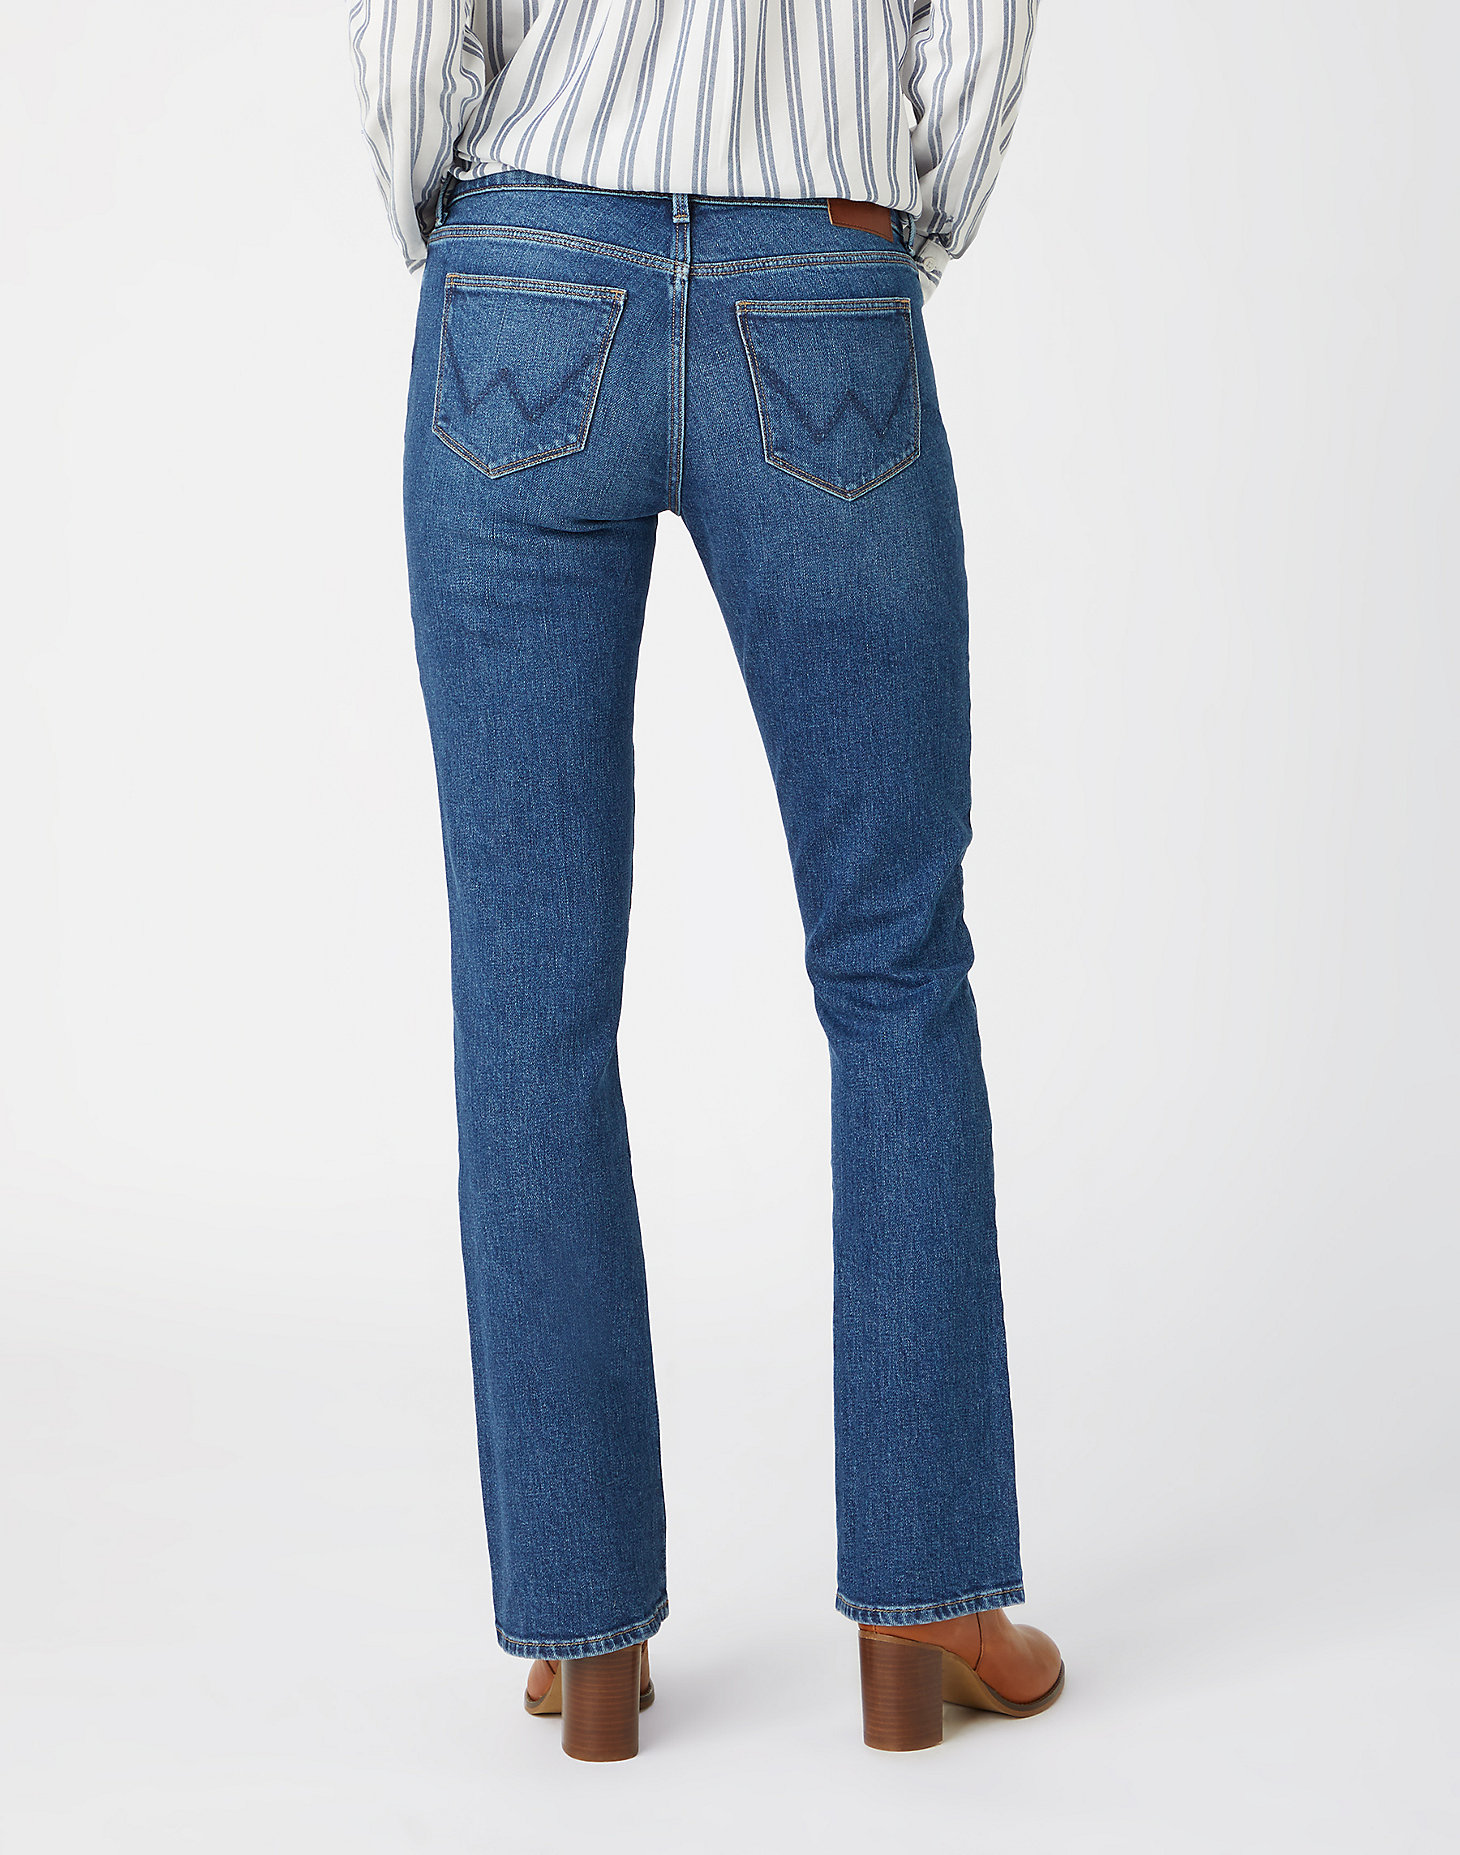 Bootcut Jeans in Airblue alternative view 2